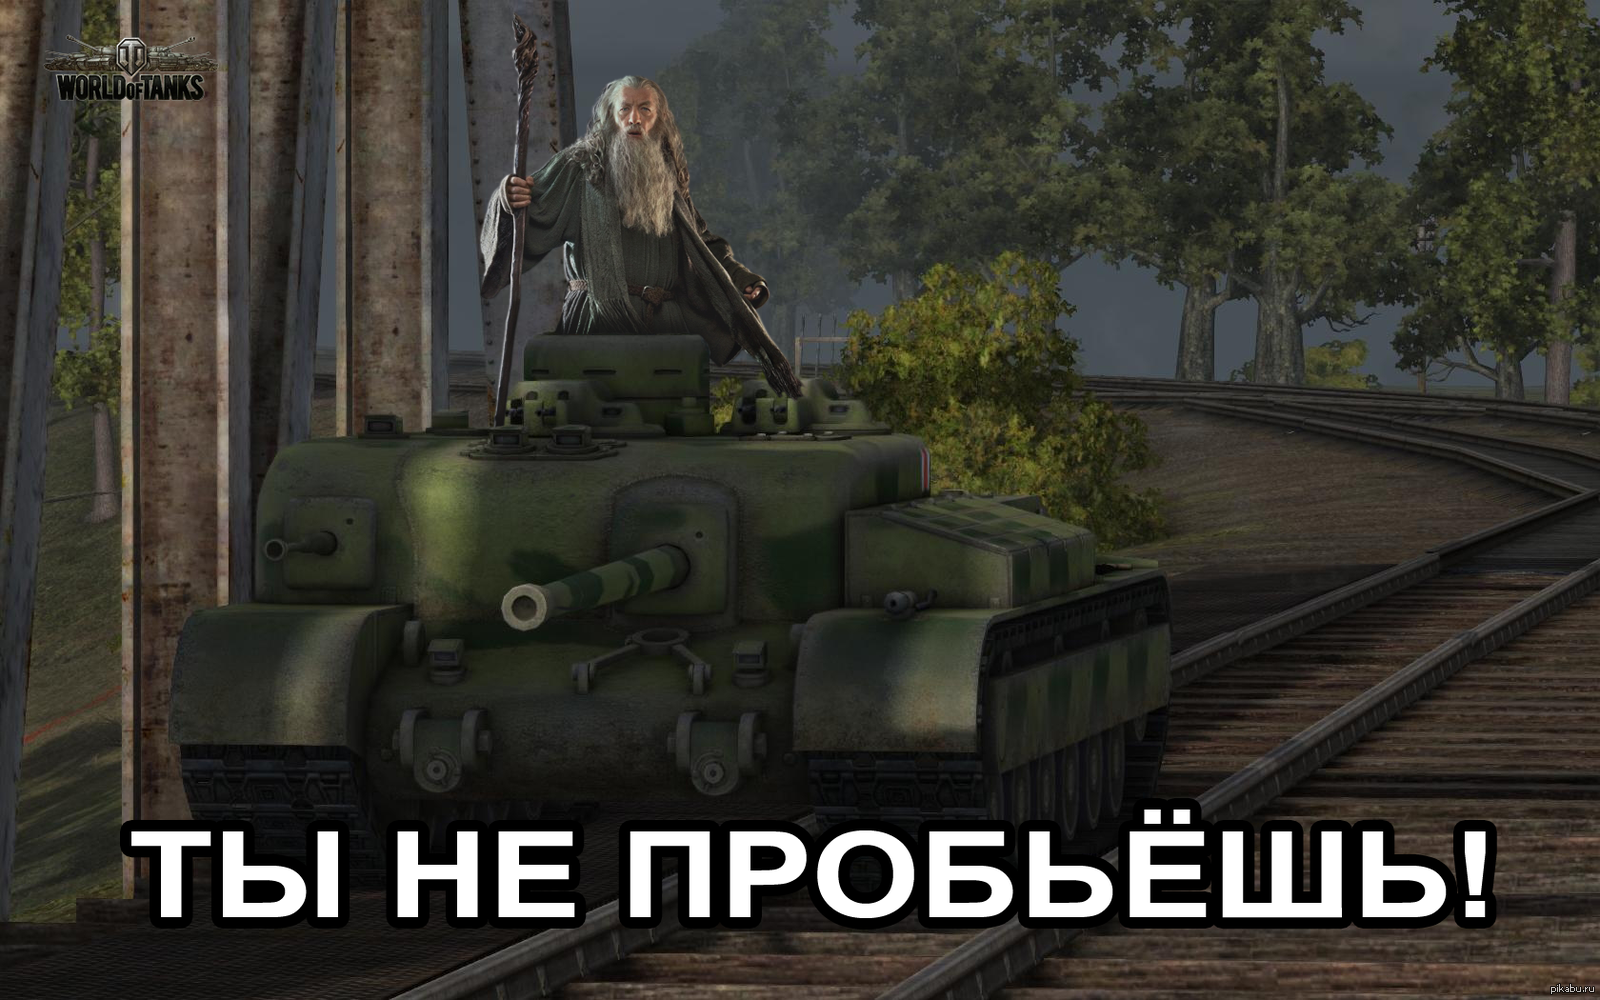 Wot ем